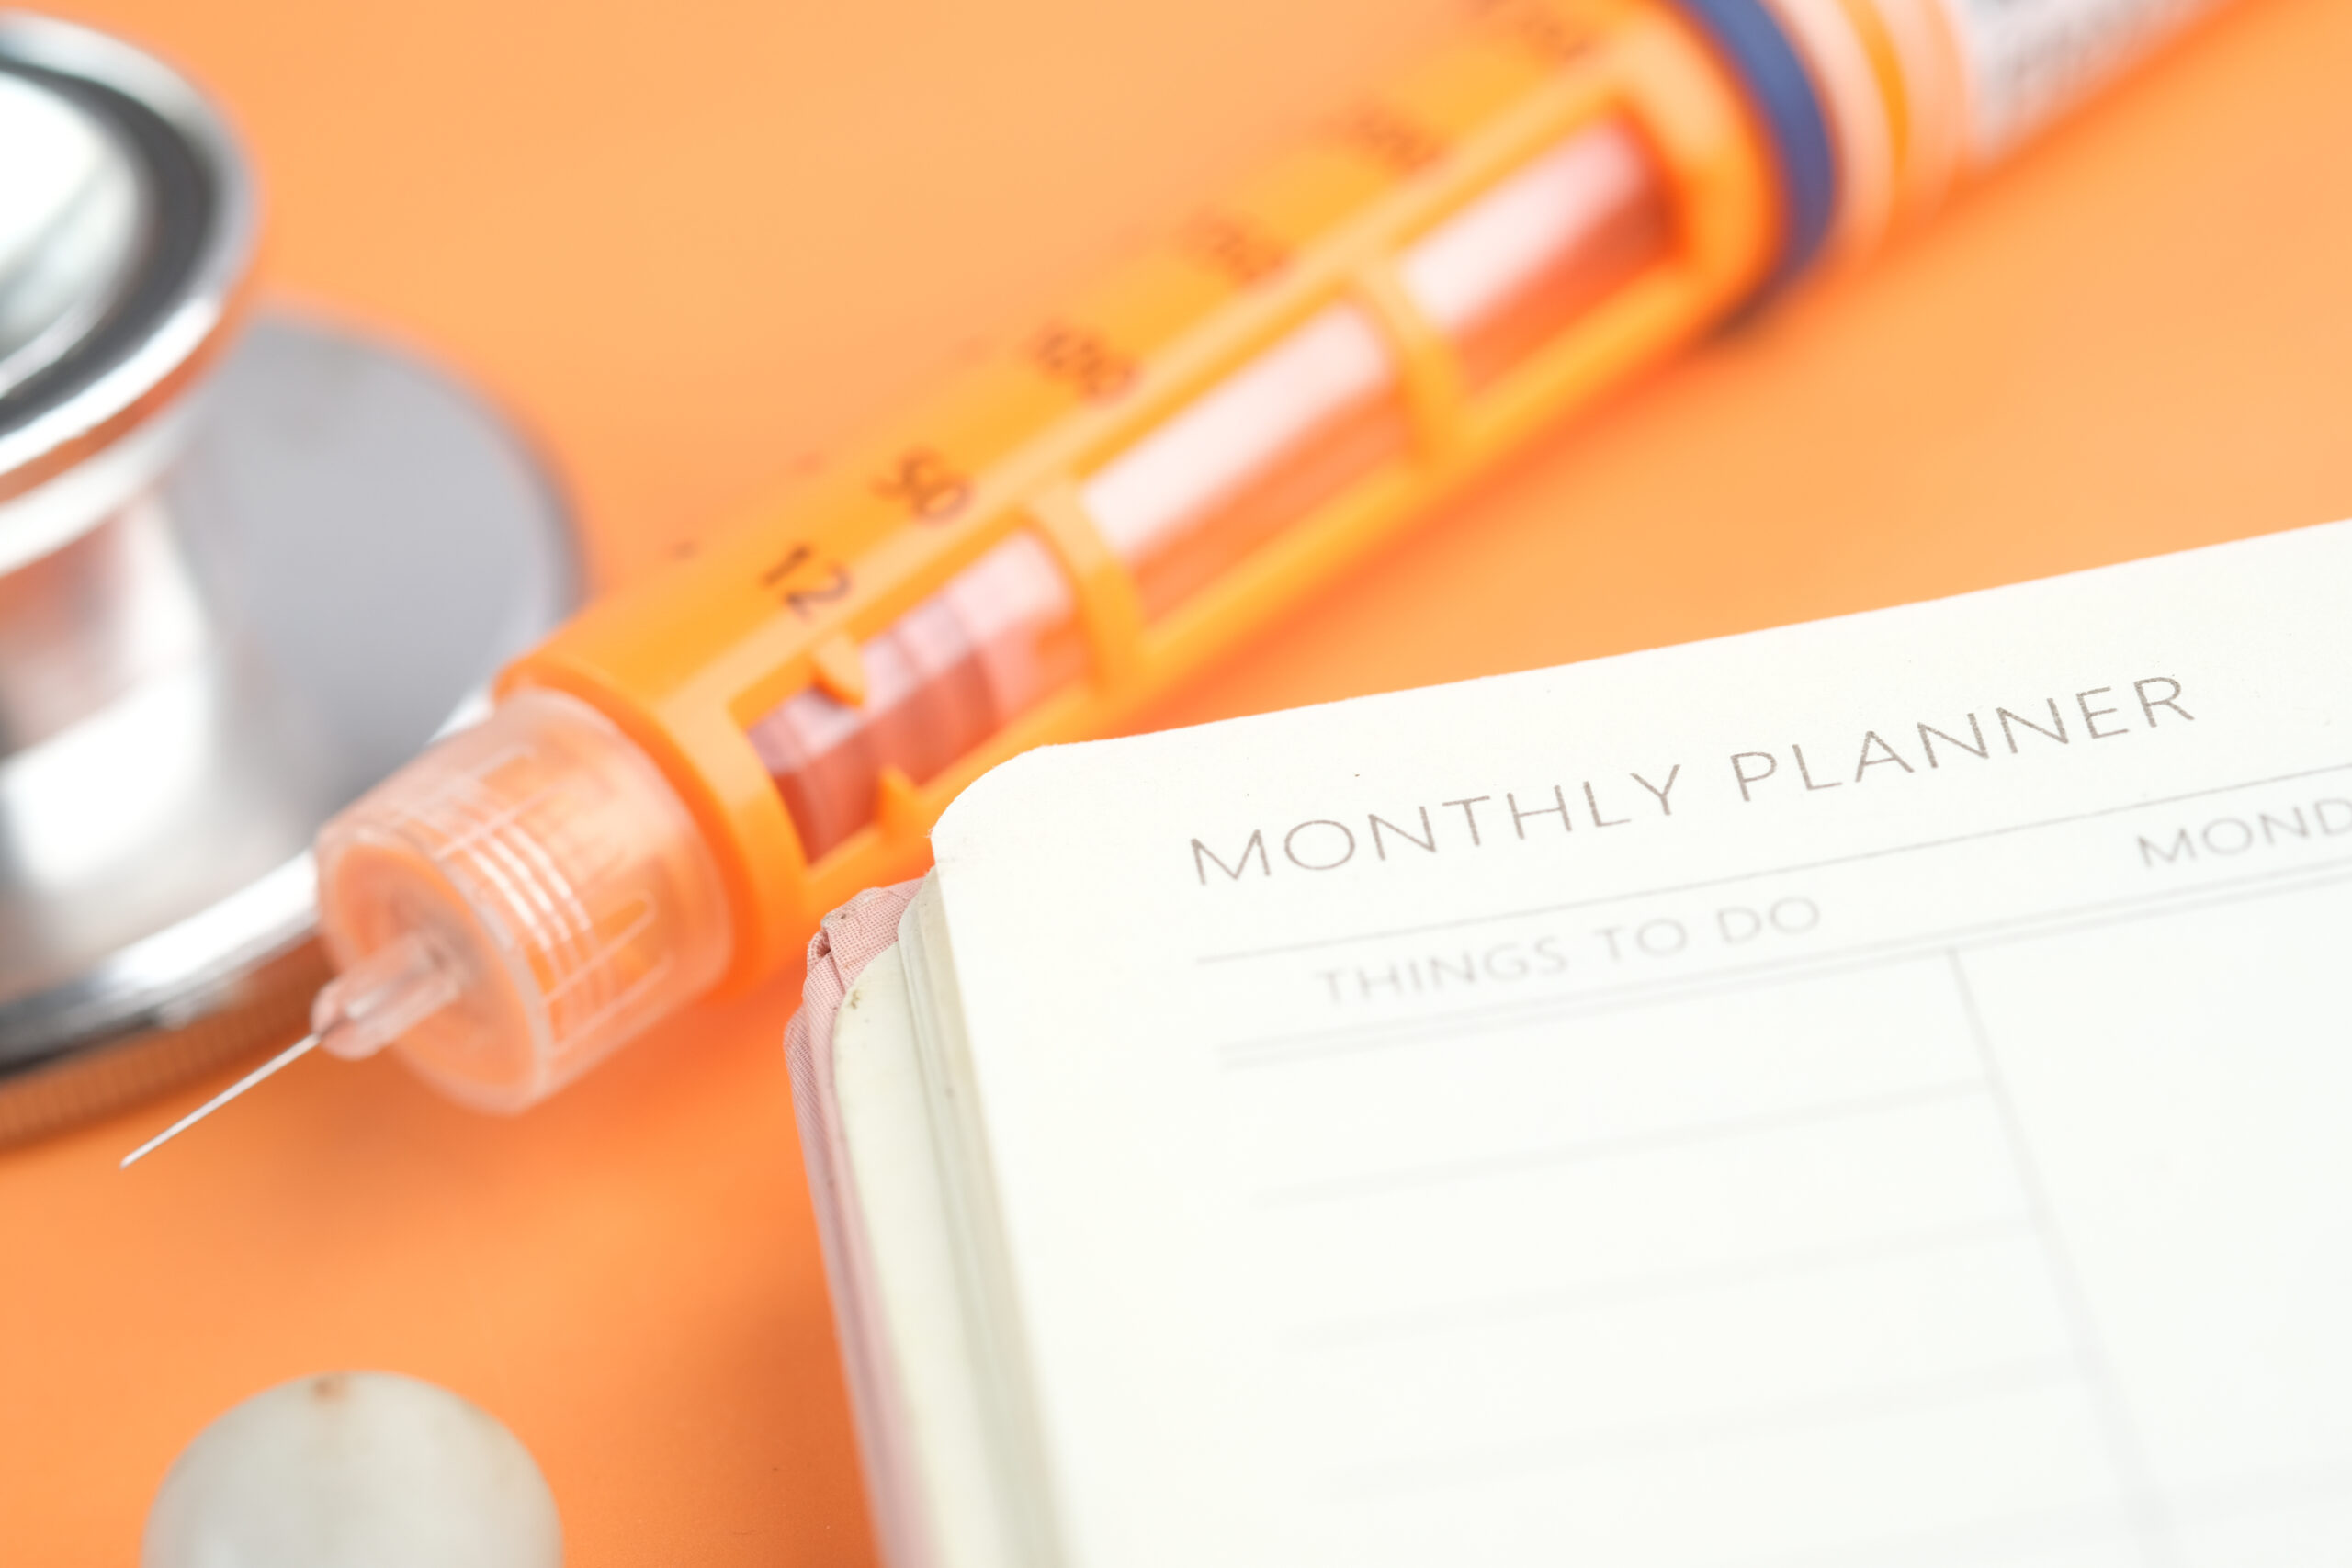 Insulin pen and weekly planner on table